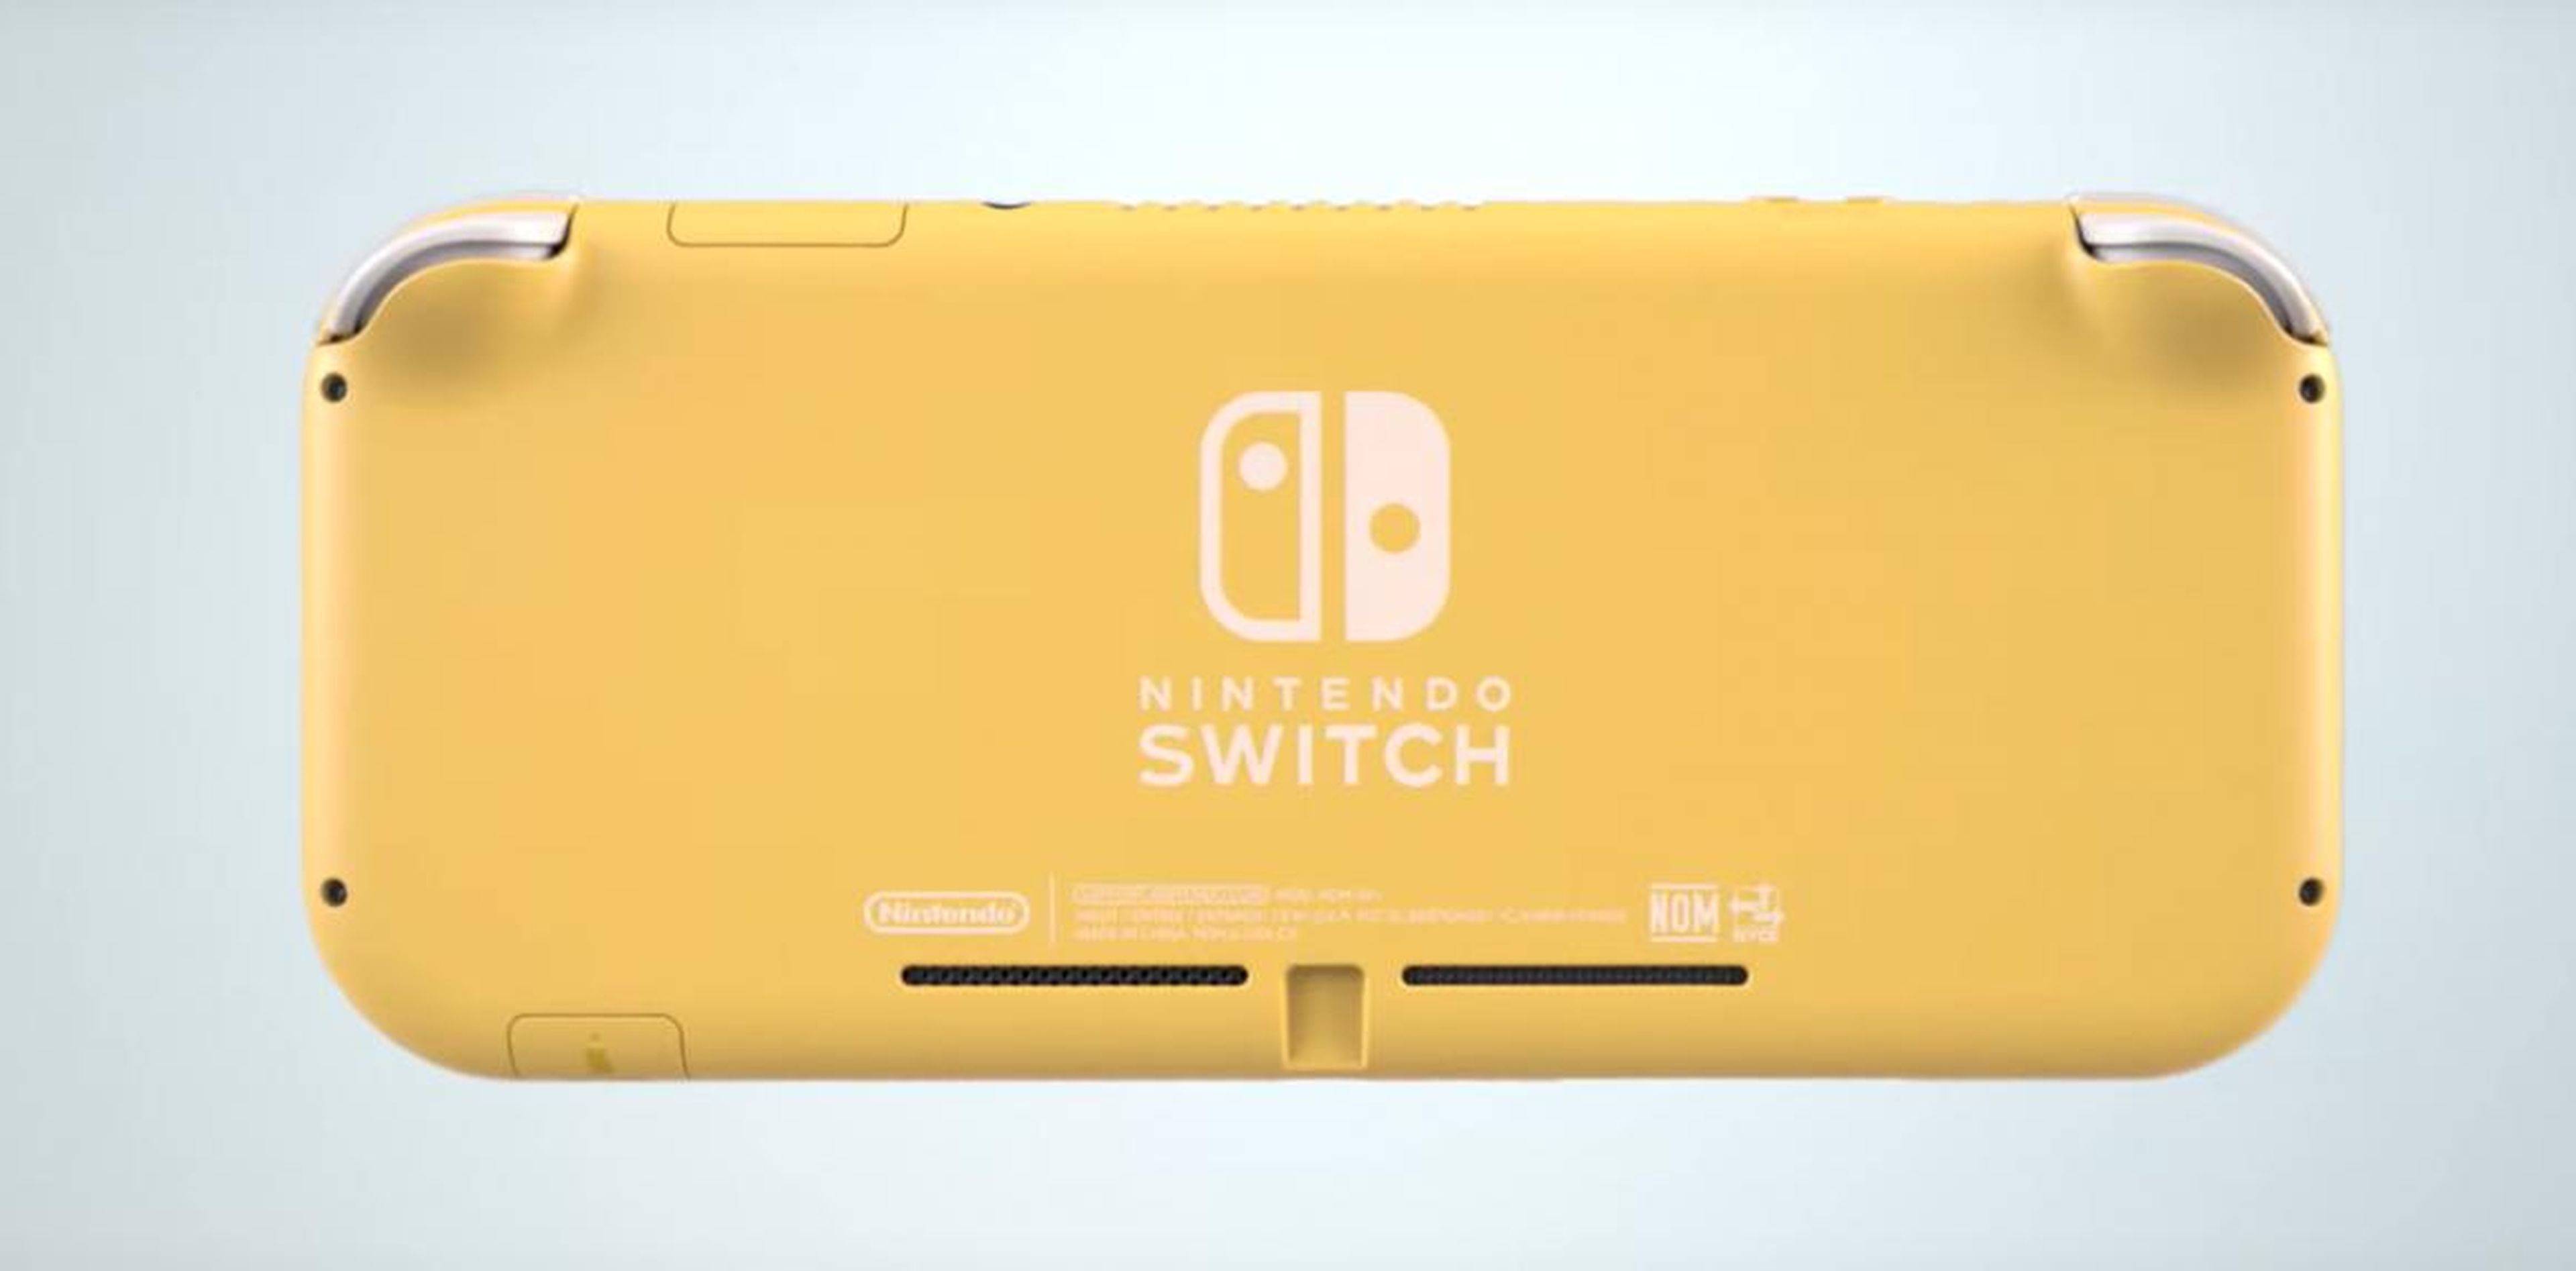 5. The battery life is a little better on the Switch Lite.